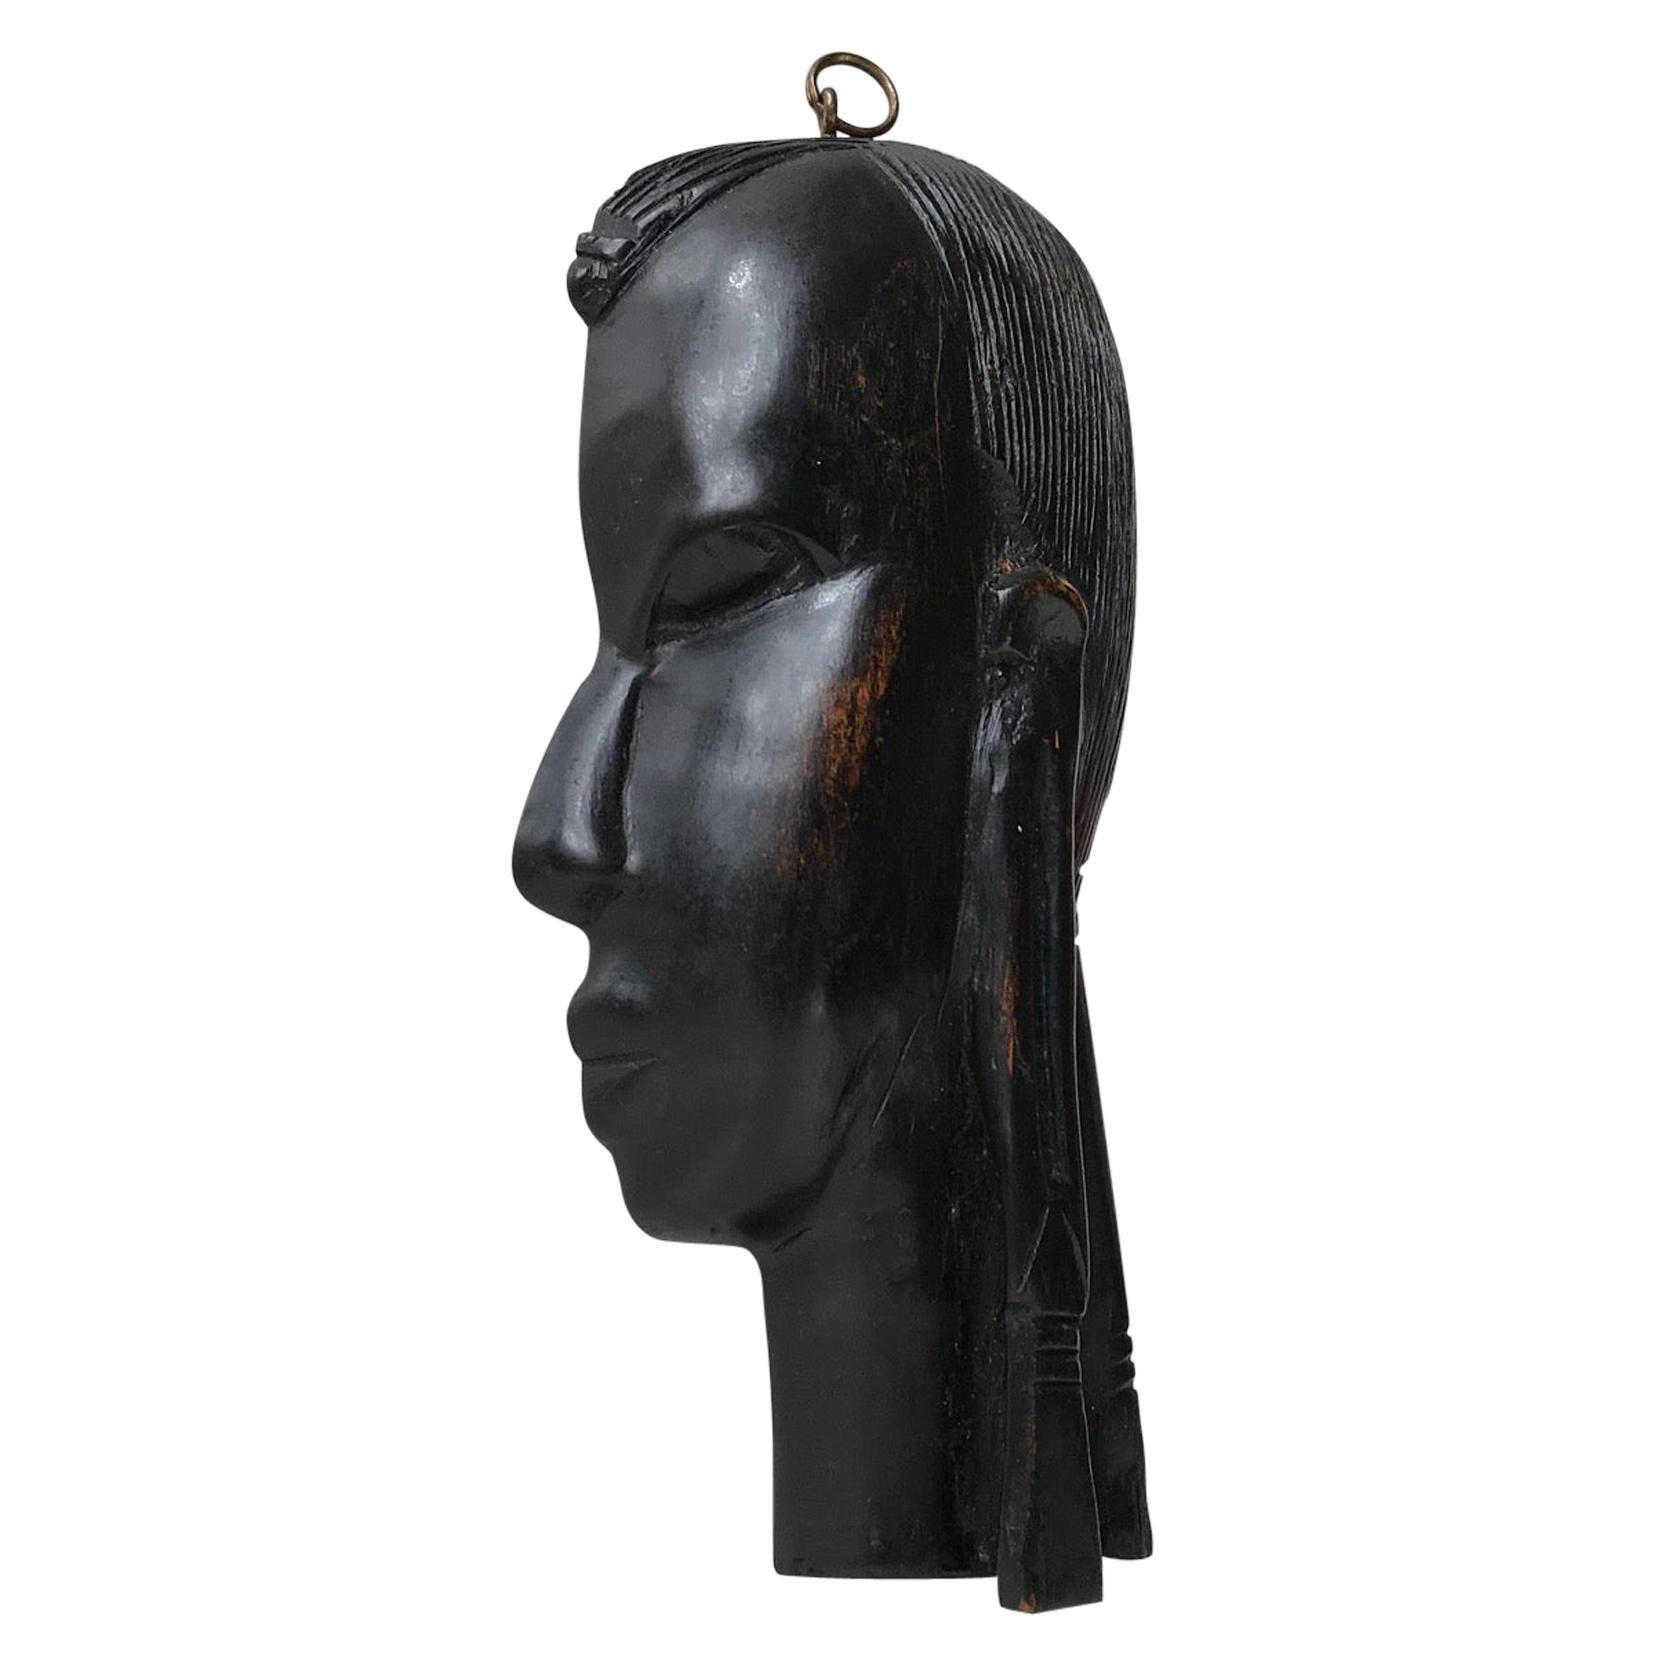 Vintage African Face Wall Plaque in Ebony, 1960s